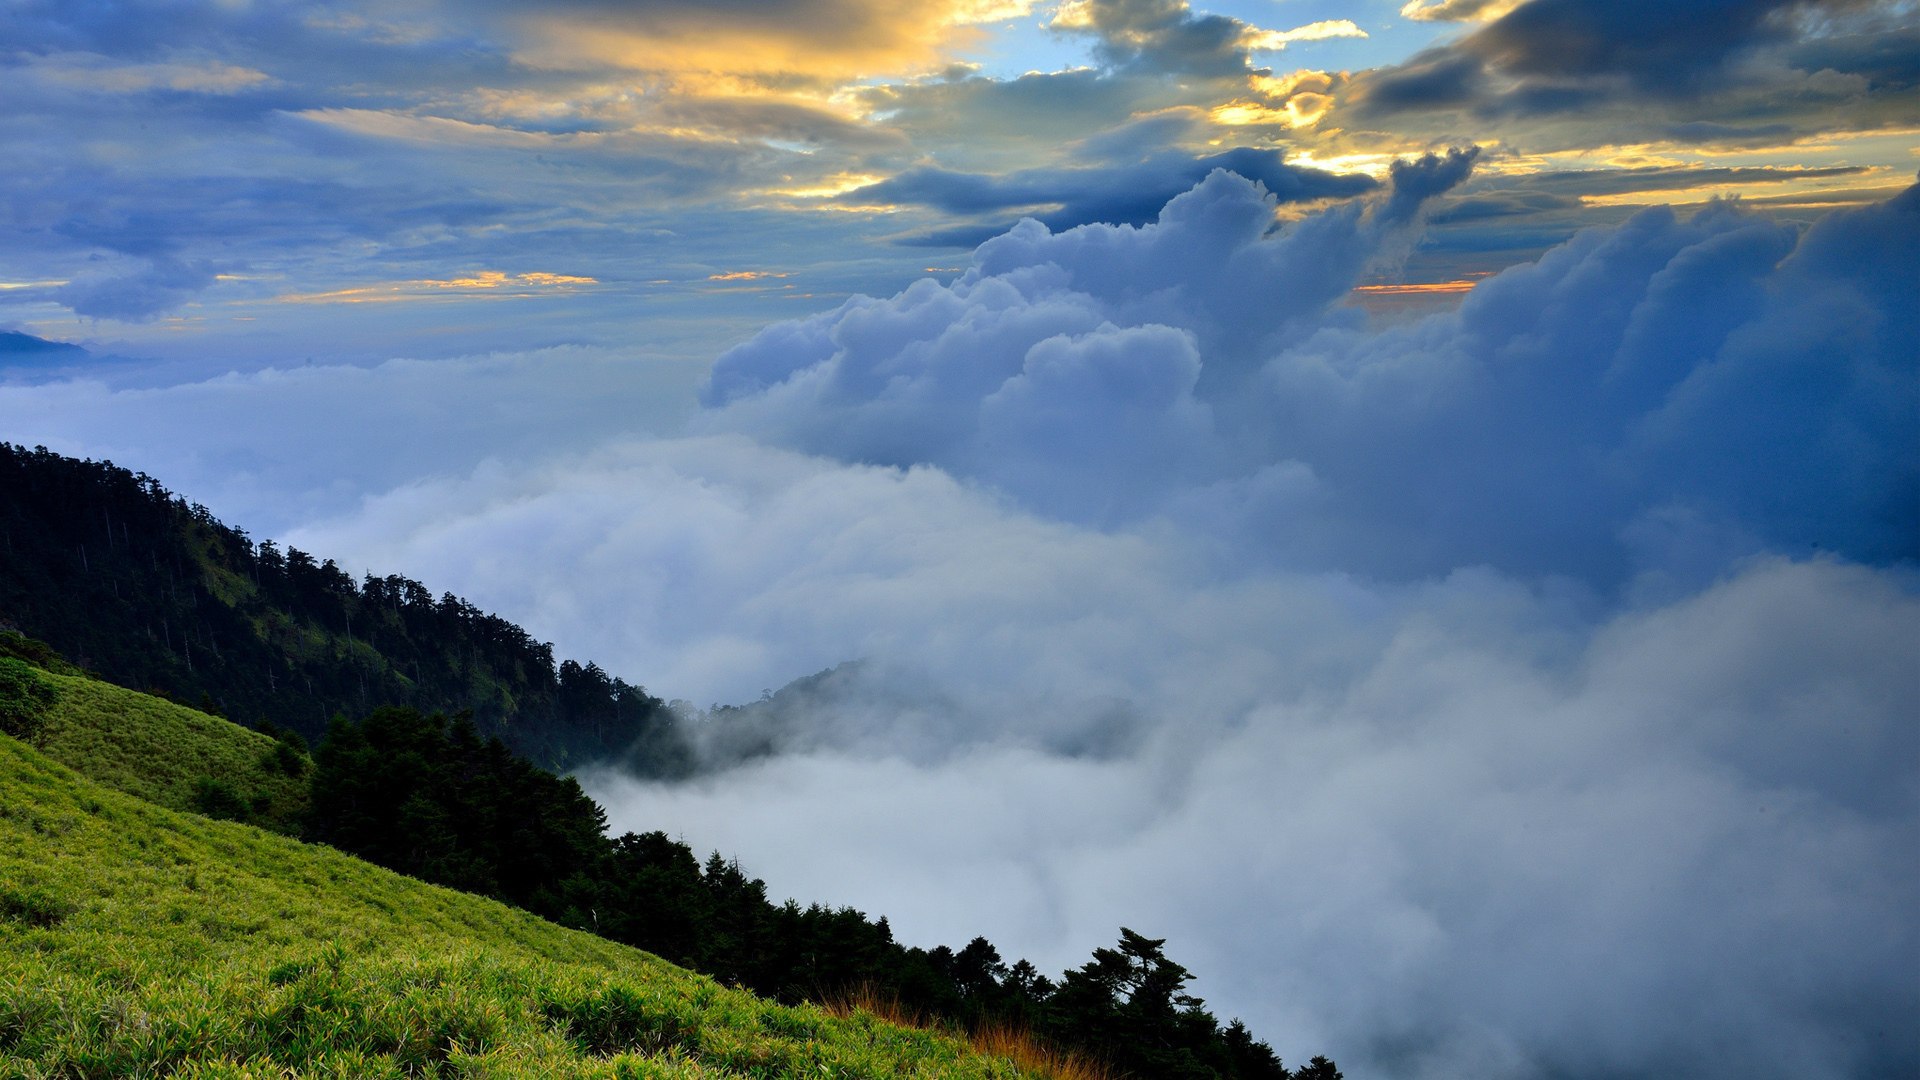 Mountain valley obscured by clouds wallpapers and images ...